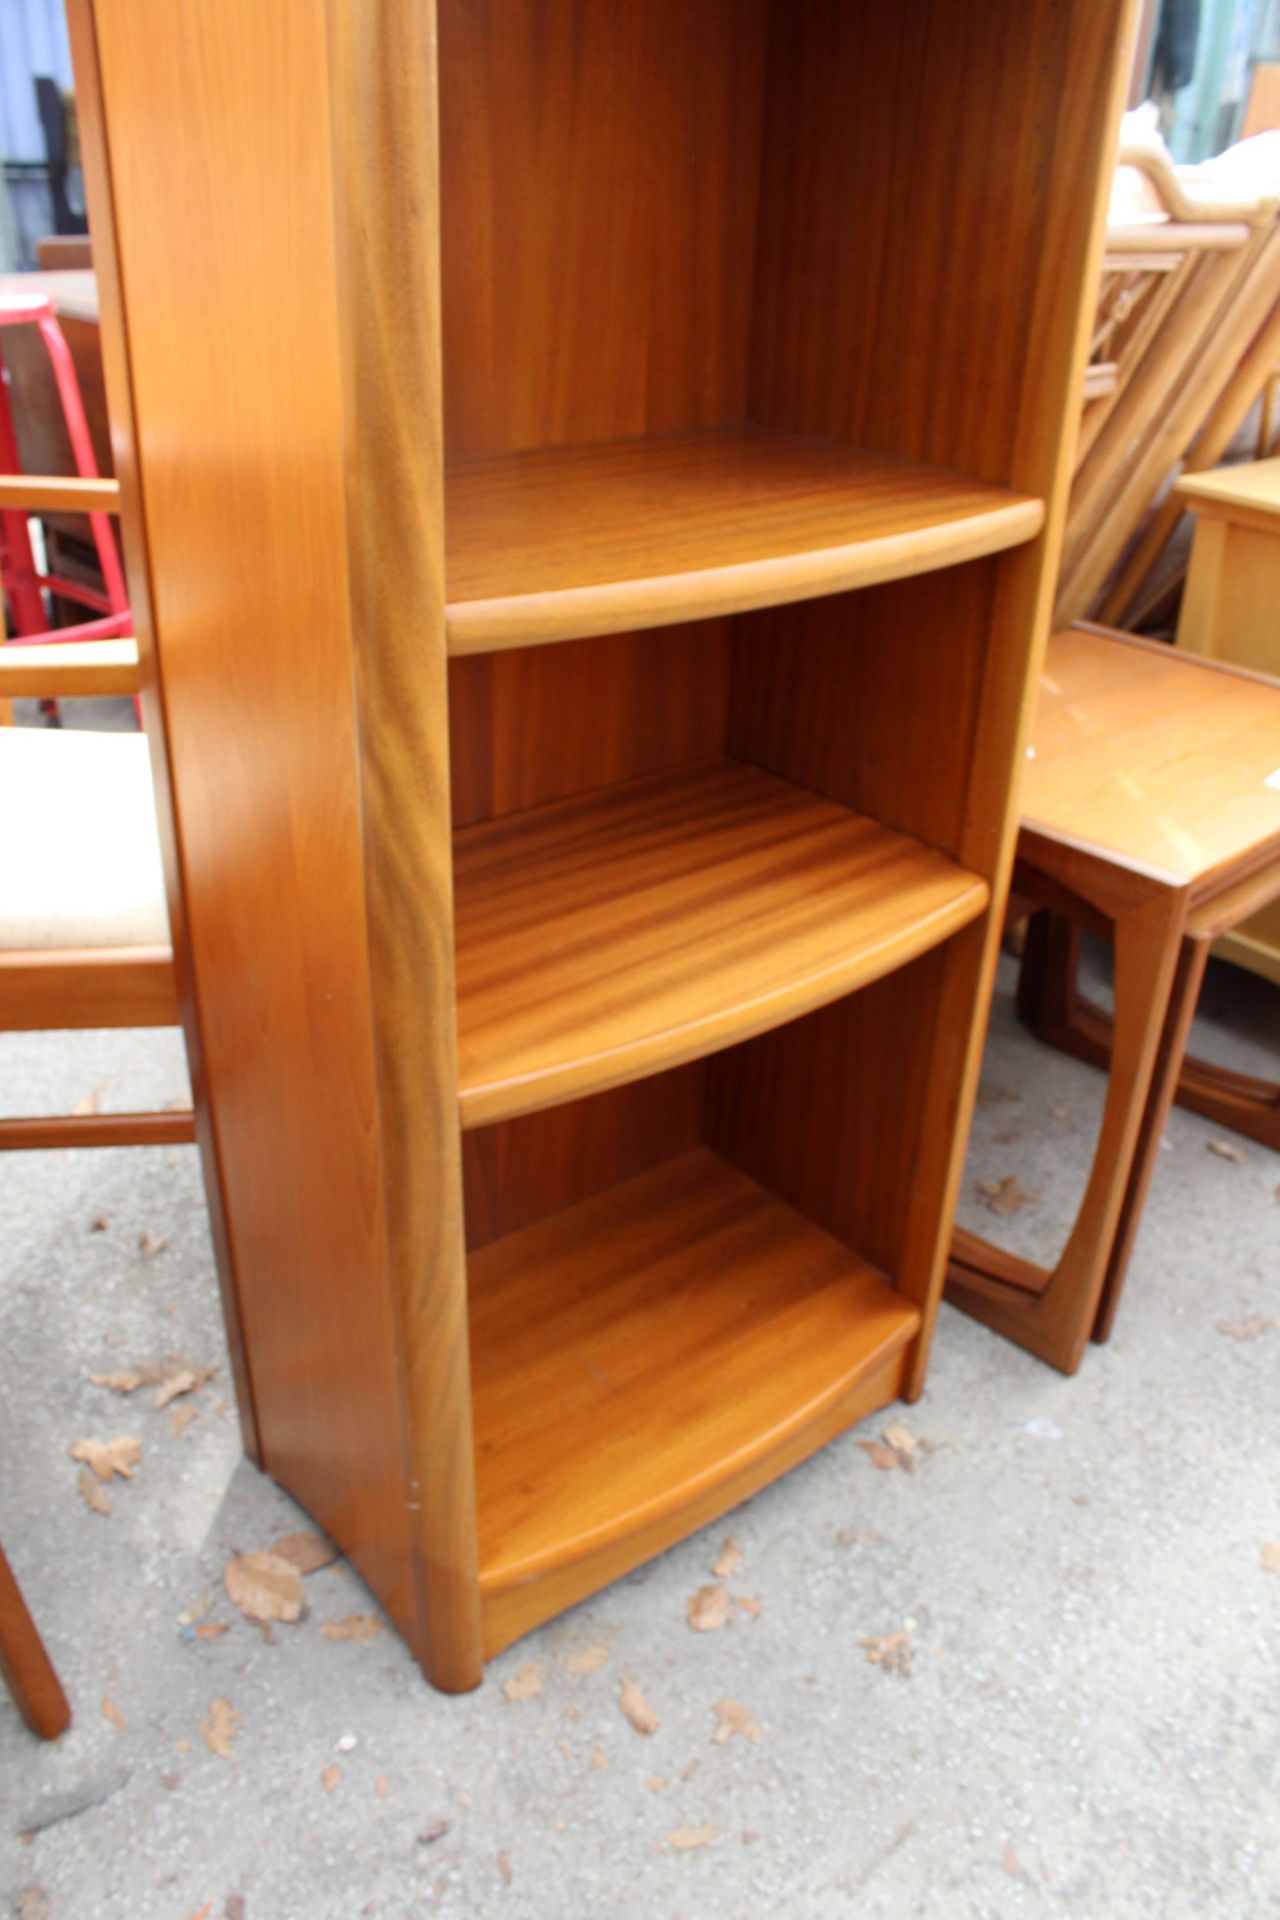 A RETRO HARDWOOD OPEN TIER OPEN BOOKCASE, 21.5" WIDE - Image 3 of 3